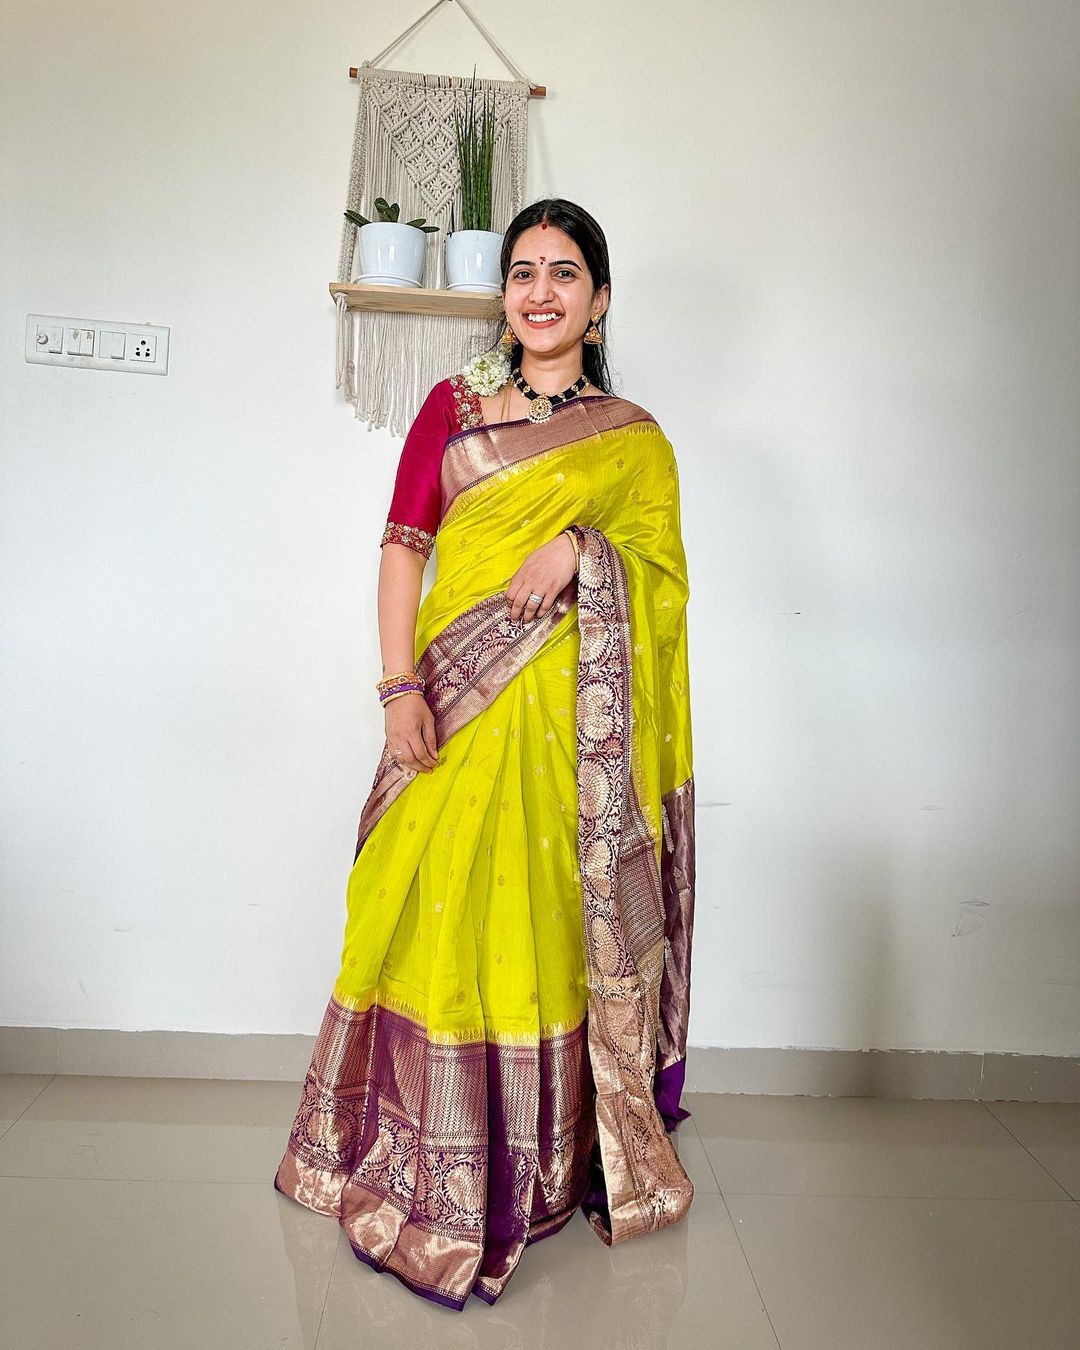 Gorgeous anchor sravanthi chokarapu latest traditional looks-Anchorsravanthi Photos,Spicy Hot Pics,Images,High Resolution WallPapers Download